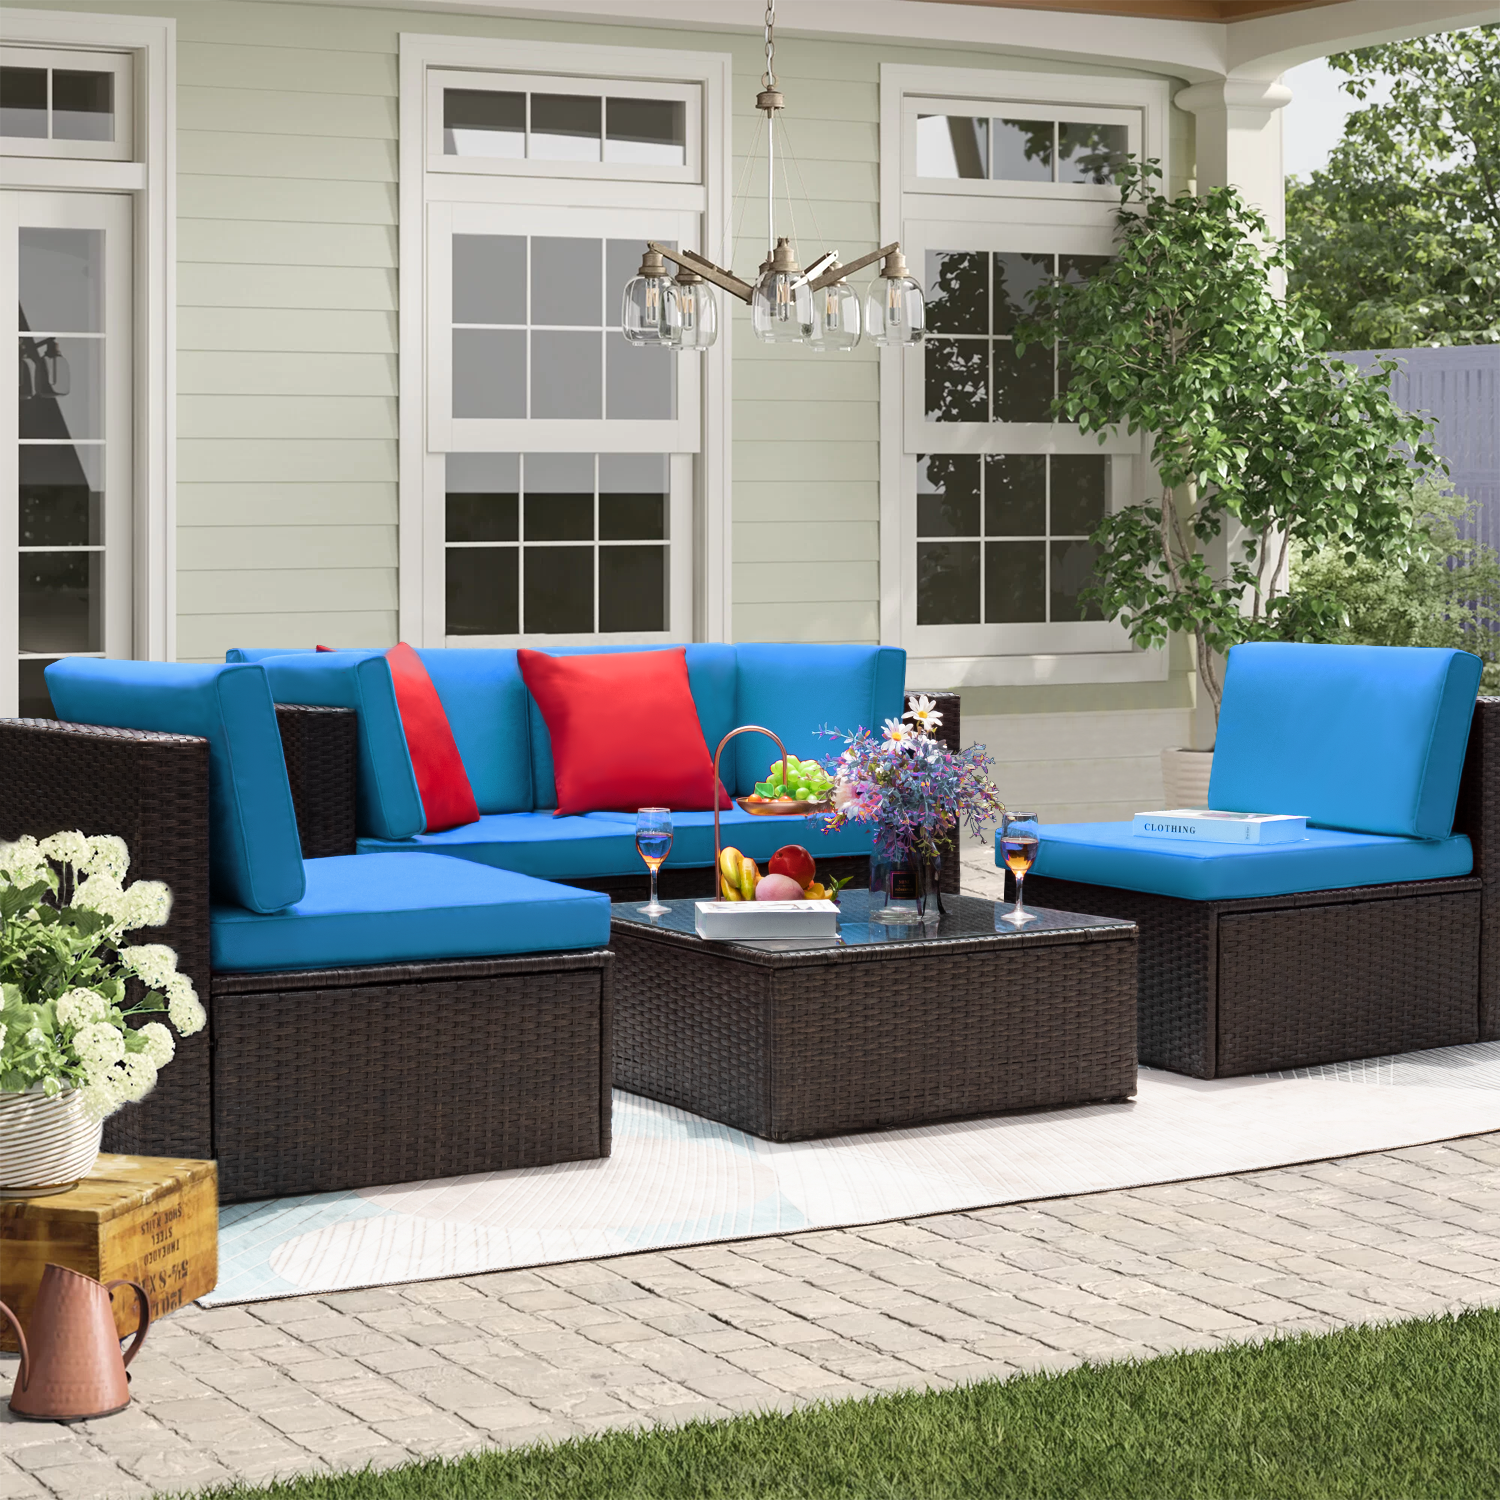 Lacoo 5 Pieces Patio Sectional Sofa Set All-Weather Wicker Rattan Conversation Sets with Glass Table, Blue - image 2 of 7